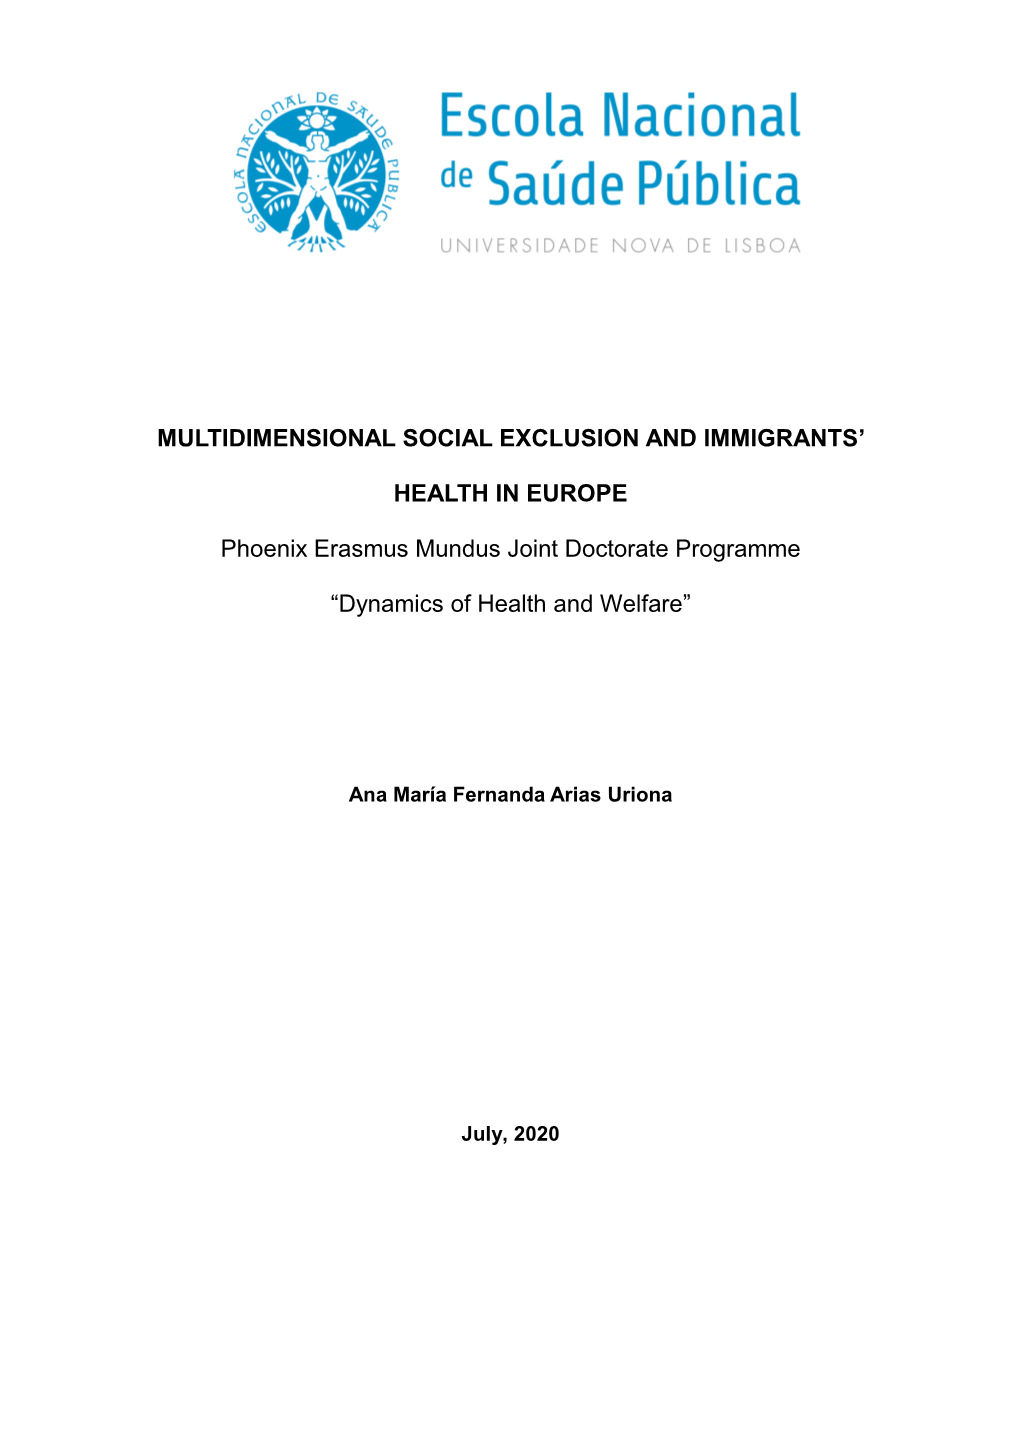 Multidimensional Social Exclusion and Immigrants’